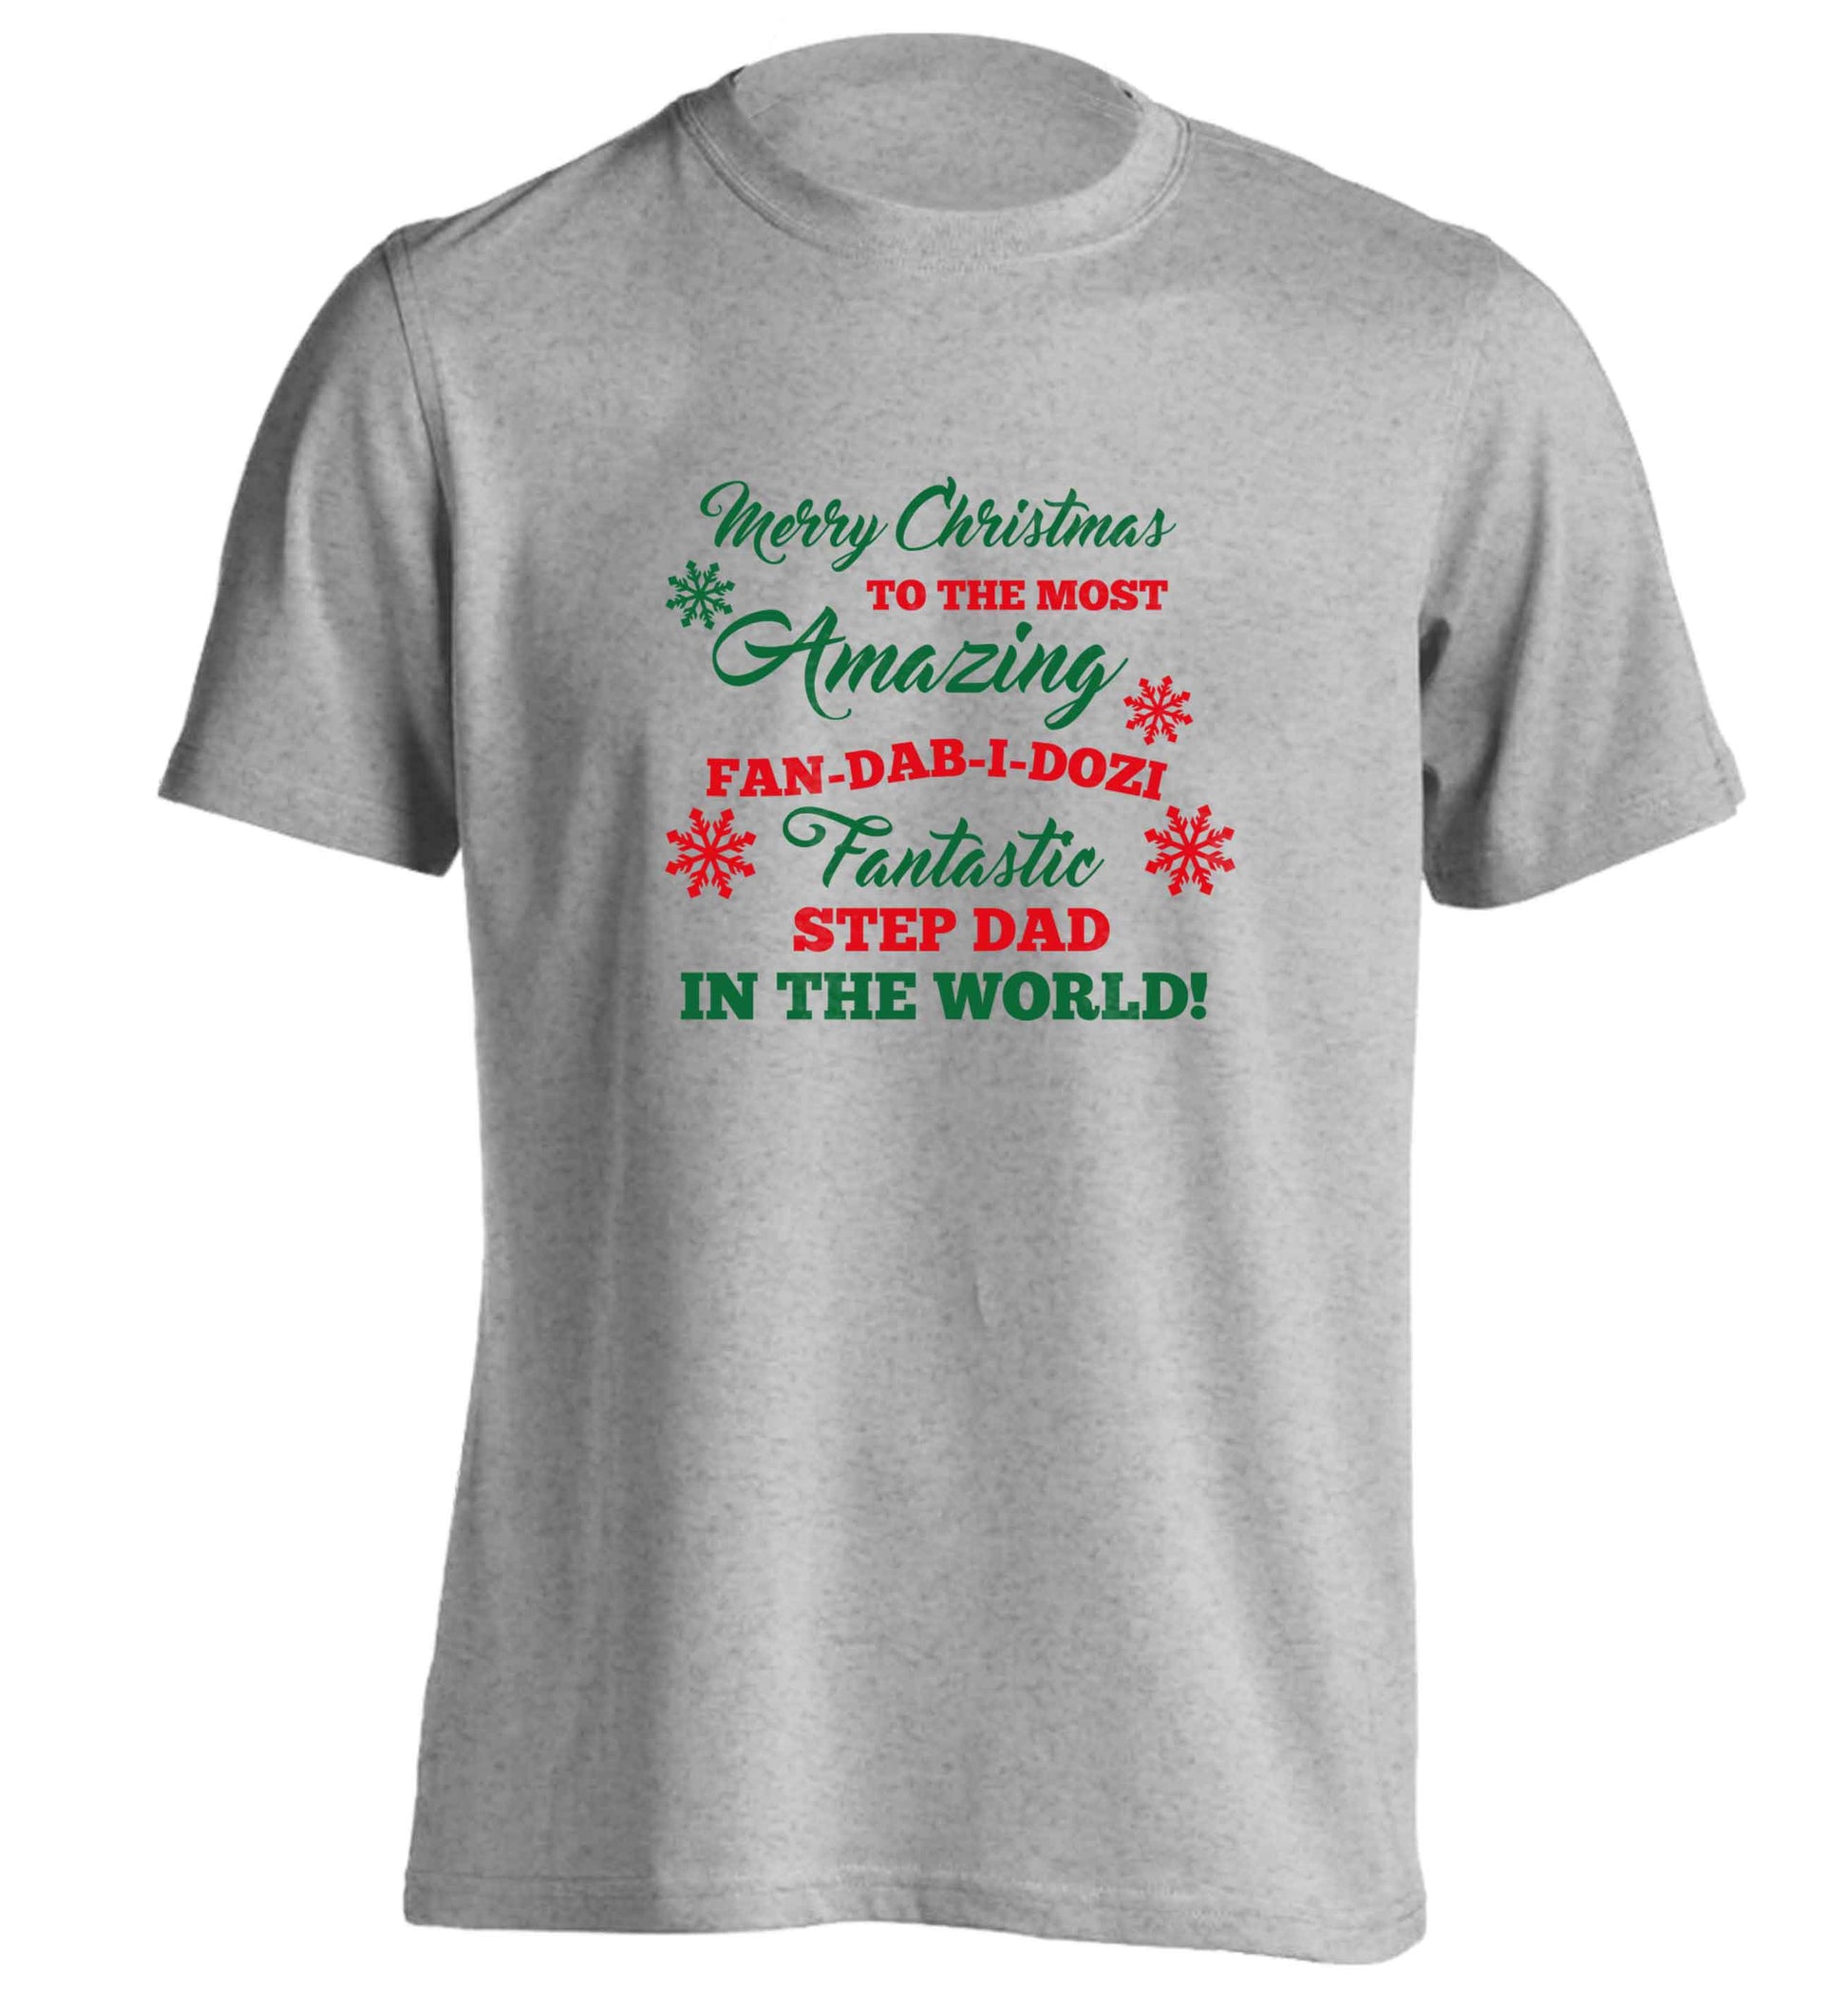 Merry Christmas to the most amazing fan-dab-i-dozi fantasic Step Dad in the world adults unisex grey Tshirt 2XL